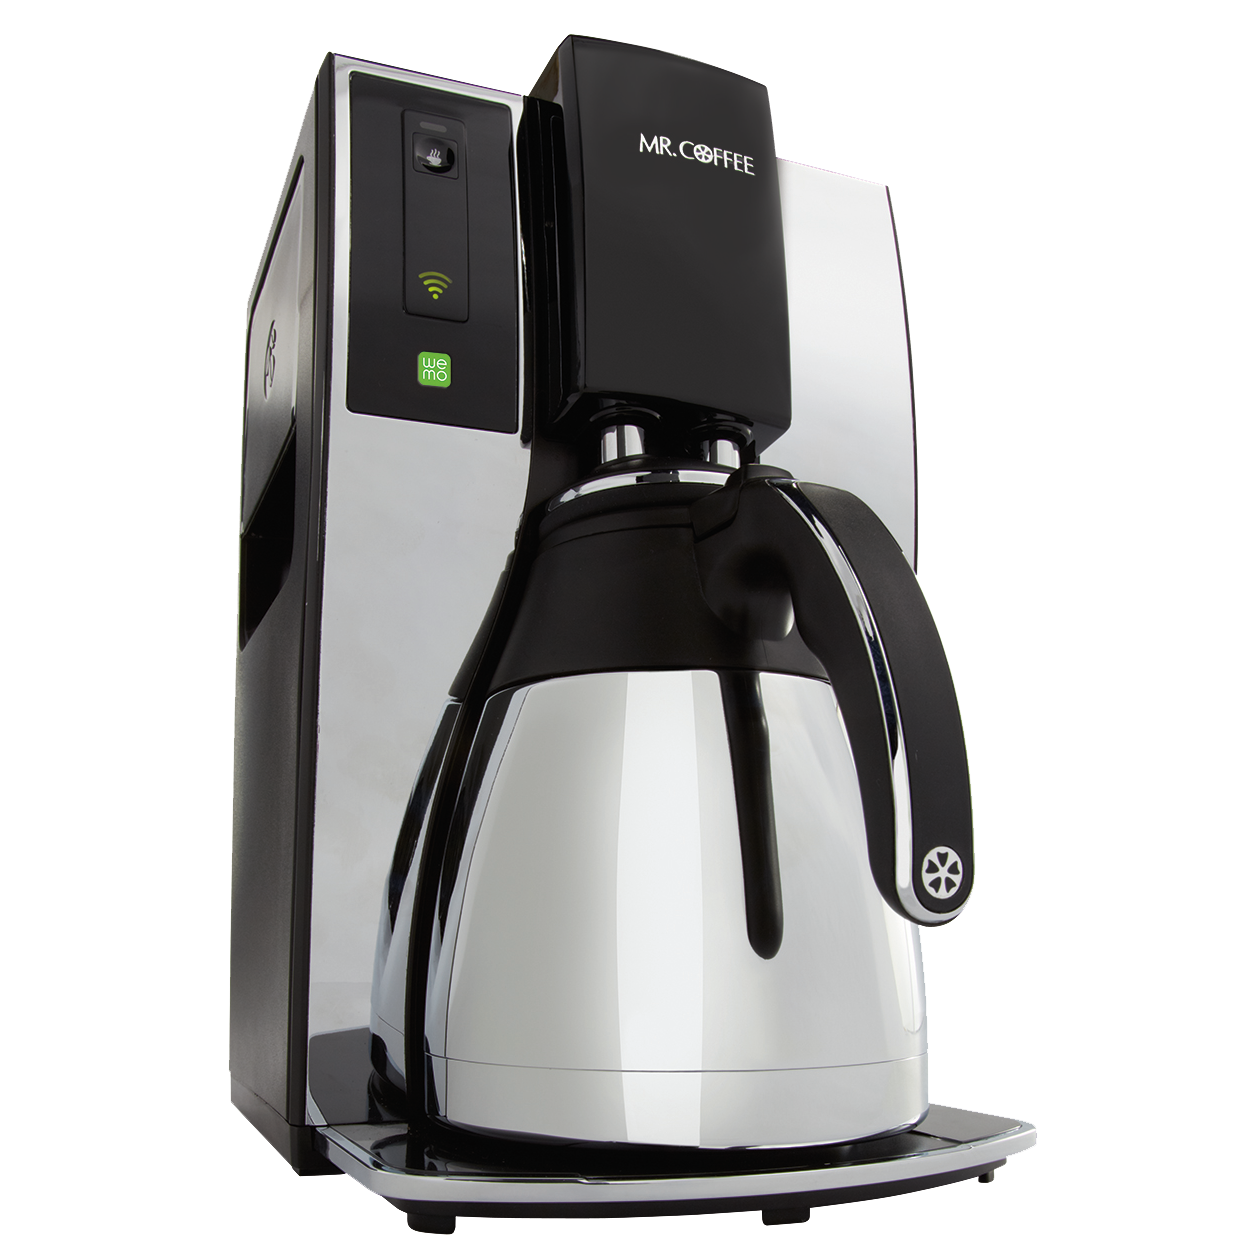 Belkin and Jarden&#039;s New &#039;Mr. Coffee Smart Coffee Maker&#039; Can Be Controlled by Your iPhone